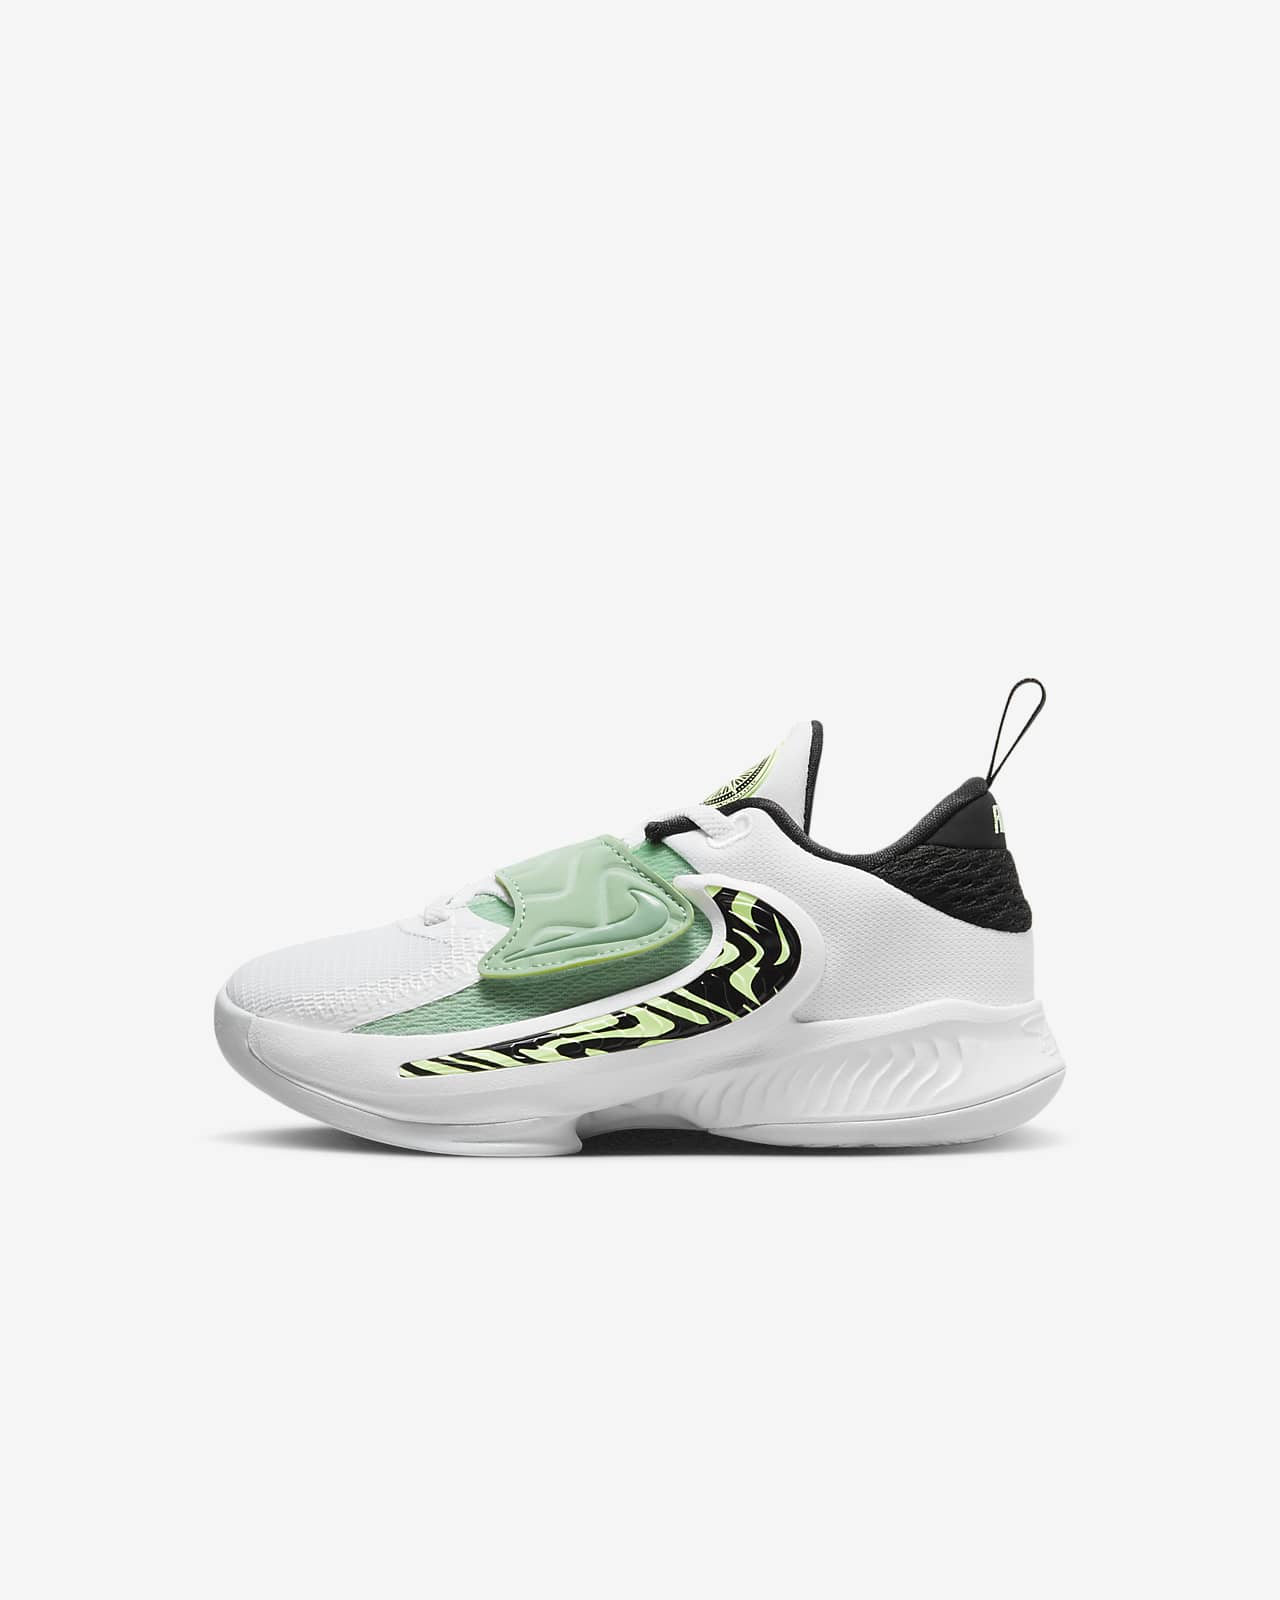 Giannis Freak 4 Younger Kids' Shoes